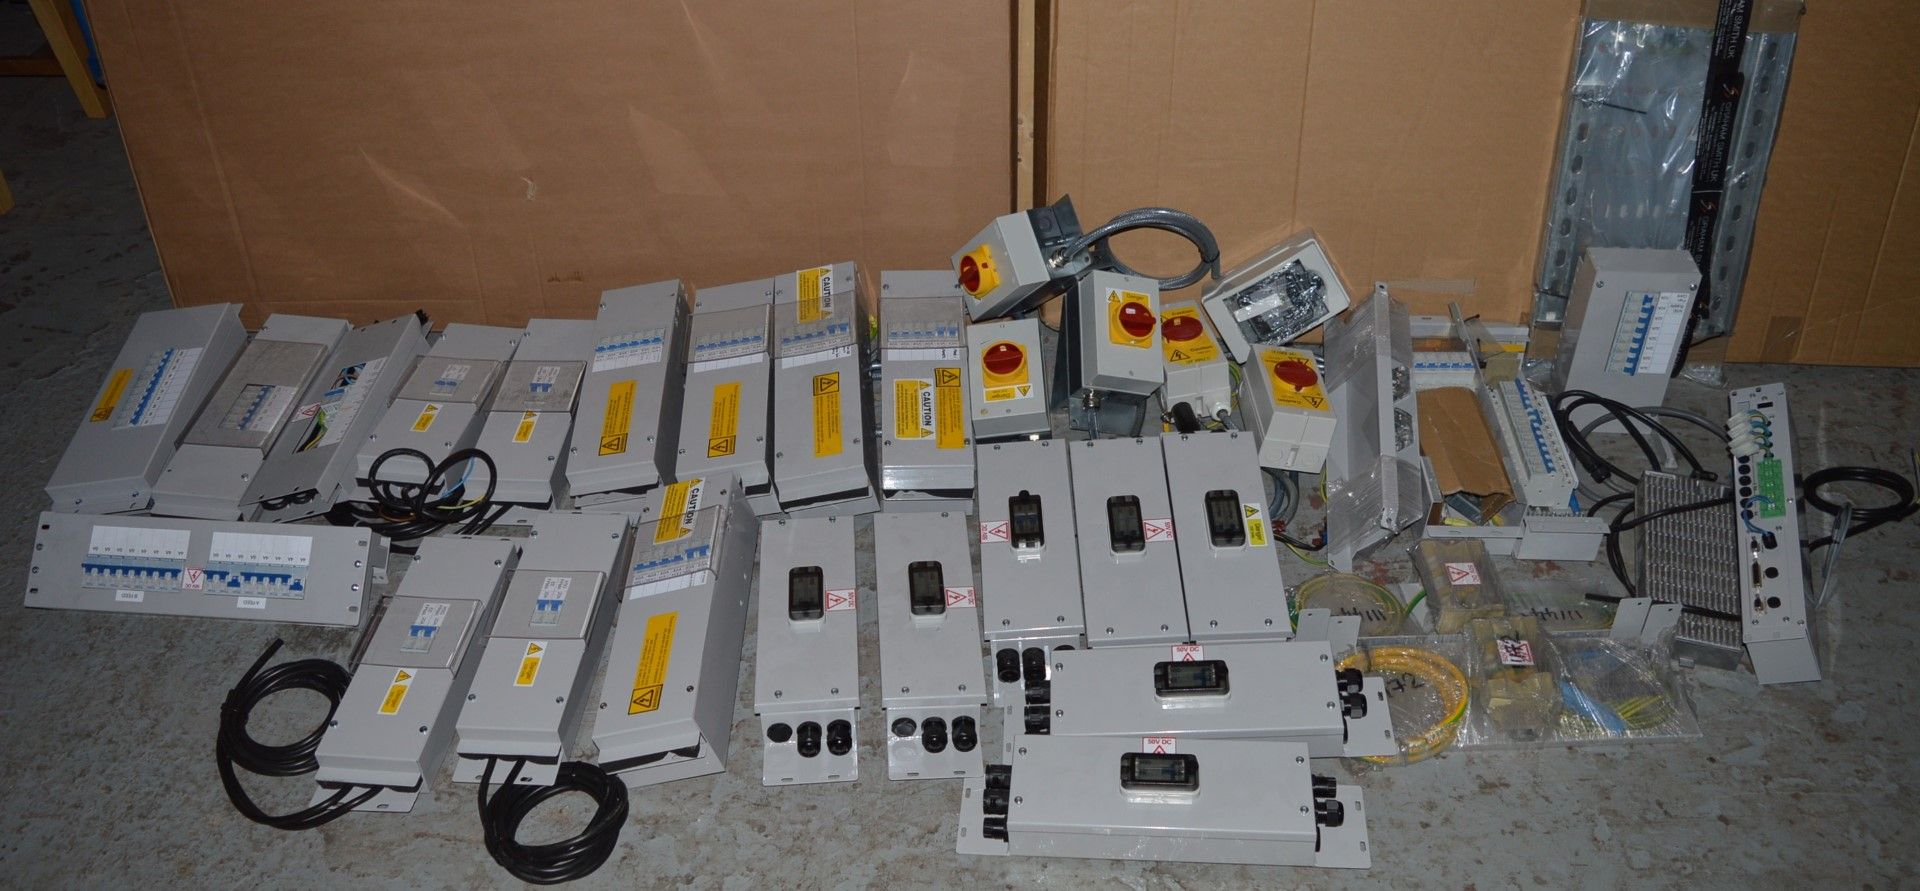 Assorted Lot of Electrical Industrial Products Including Switch Boxes, Circuit Breakers and Power